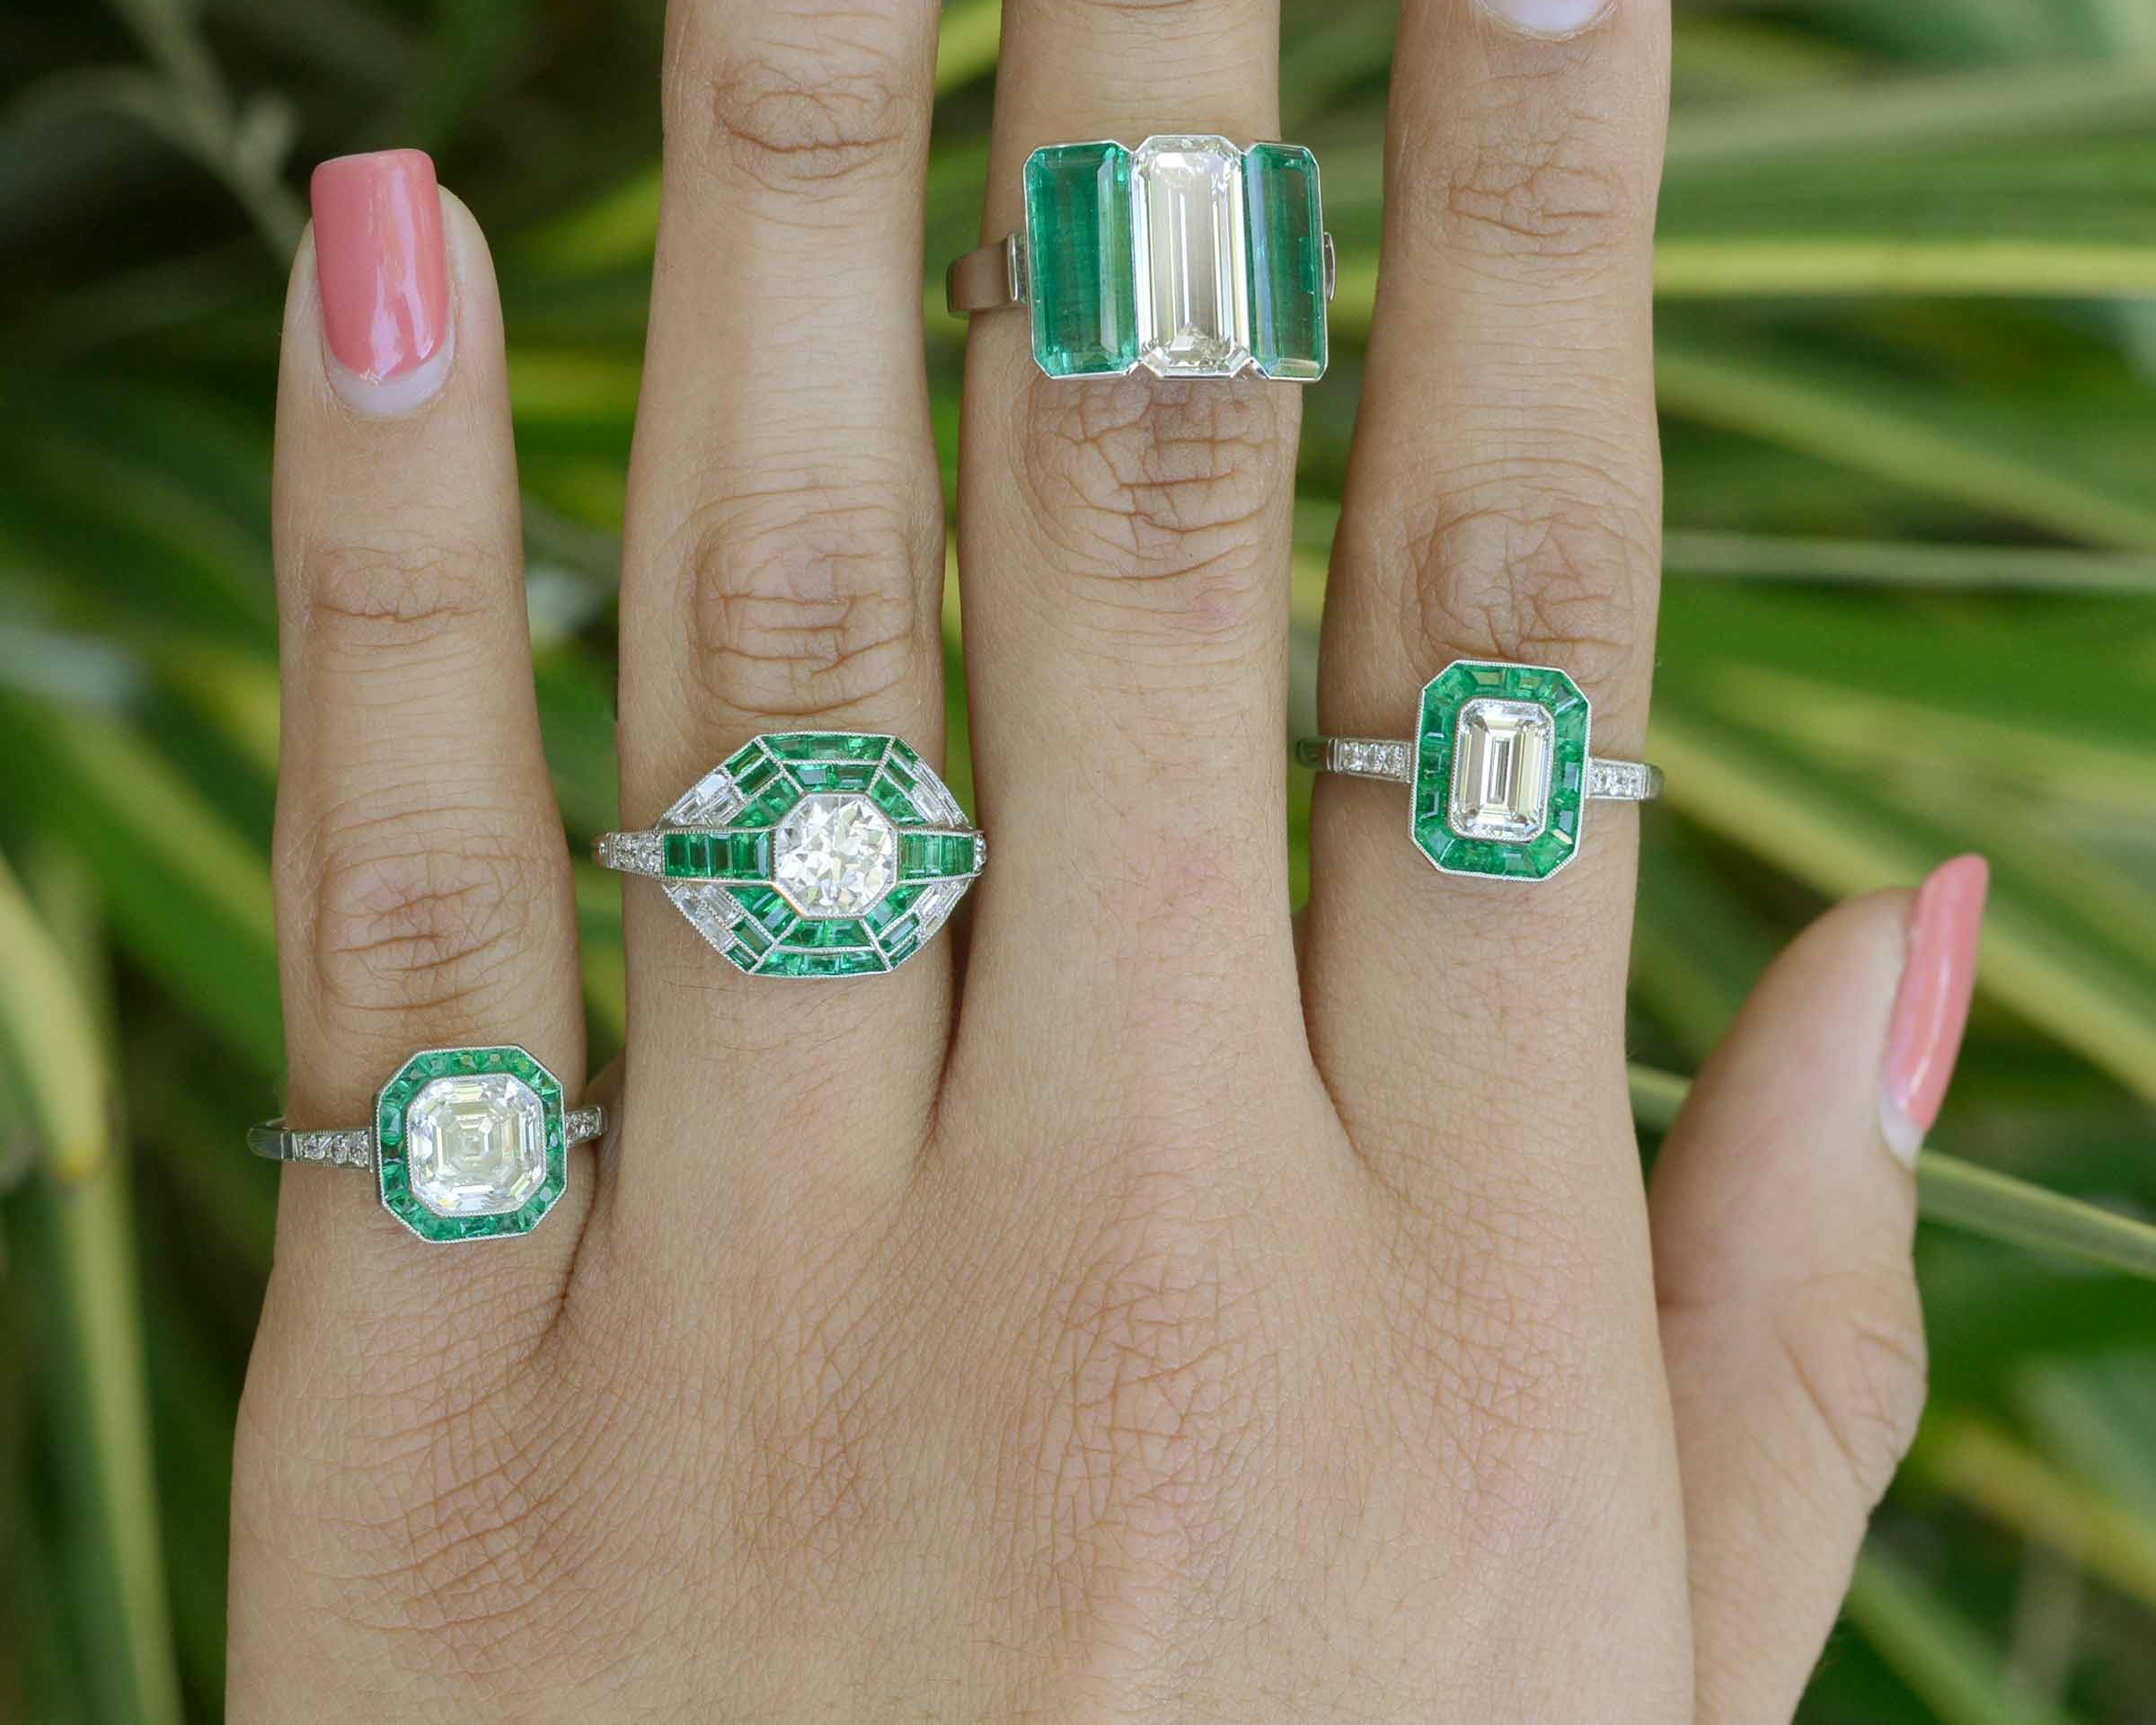 These engagement rings feature a large diamond and several emerald accent gemstones.